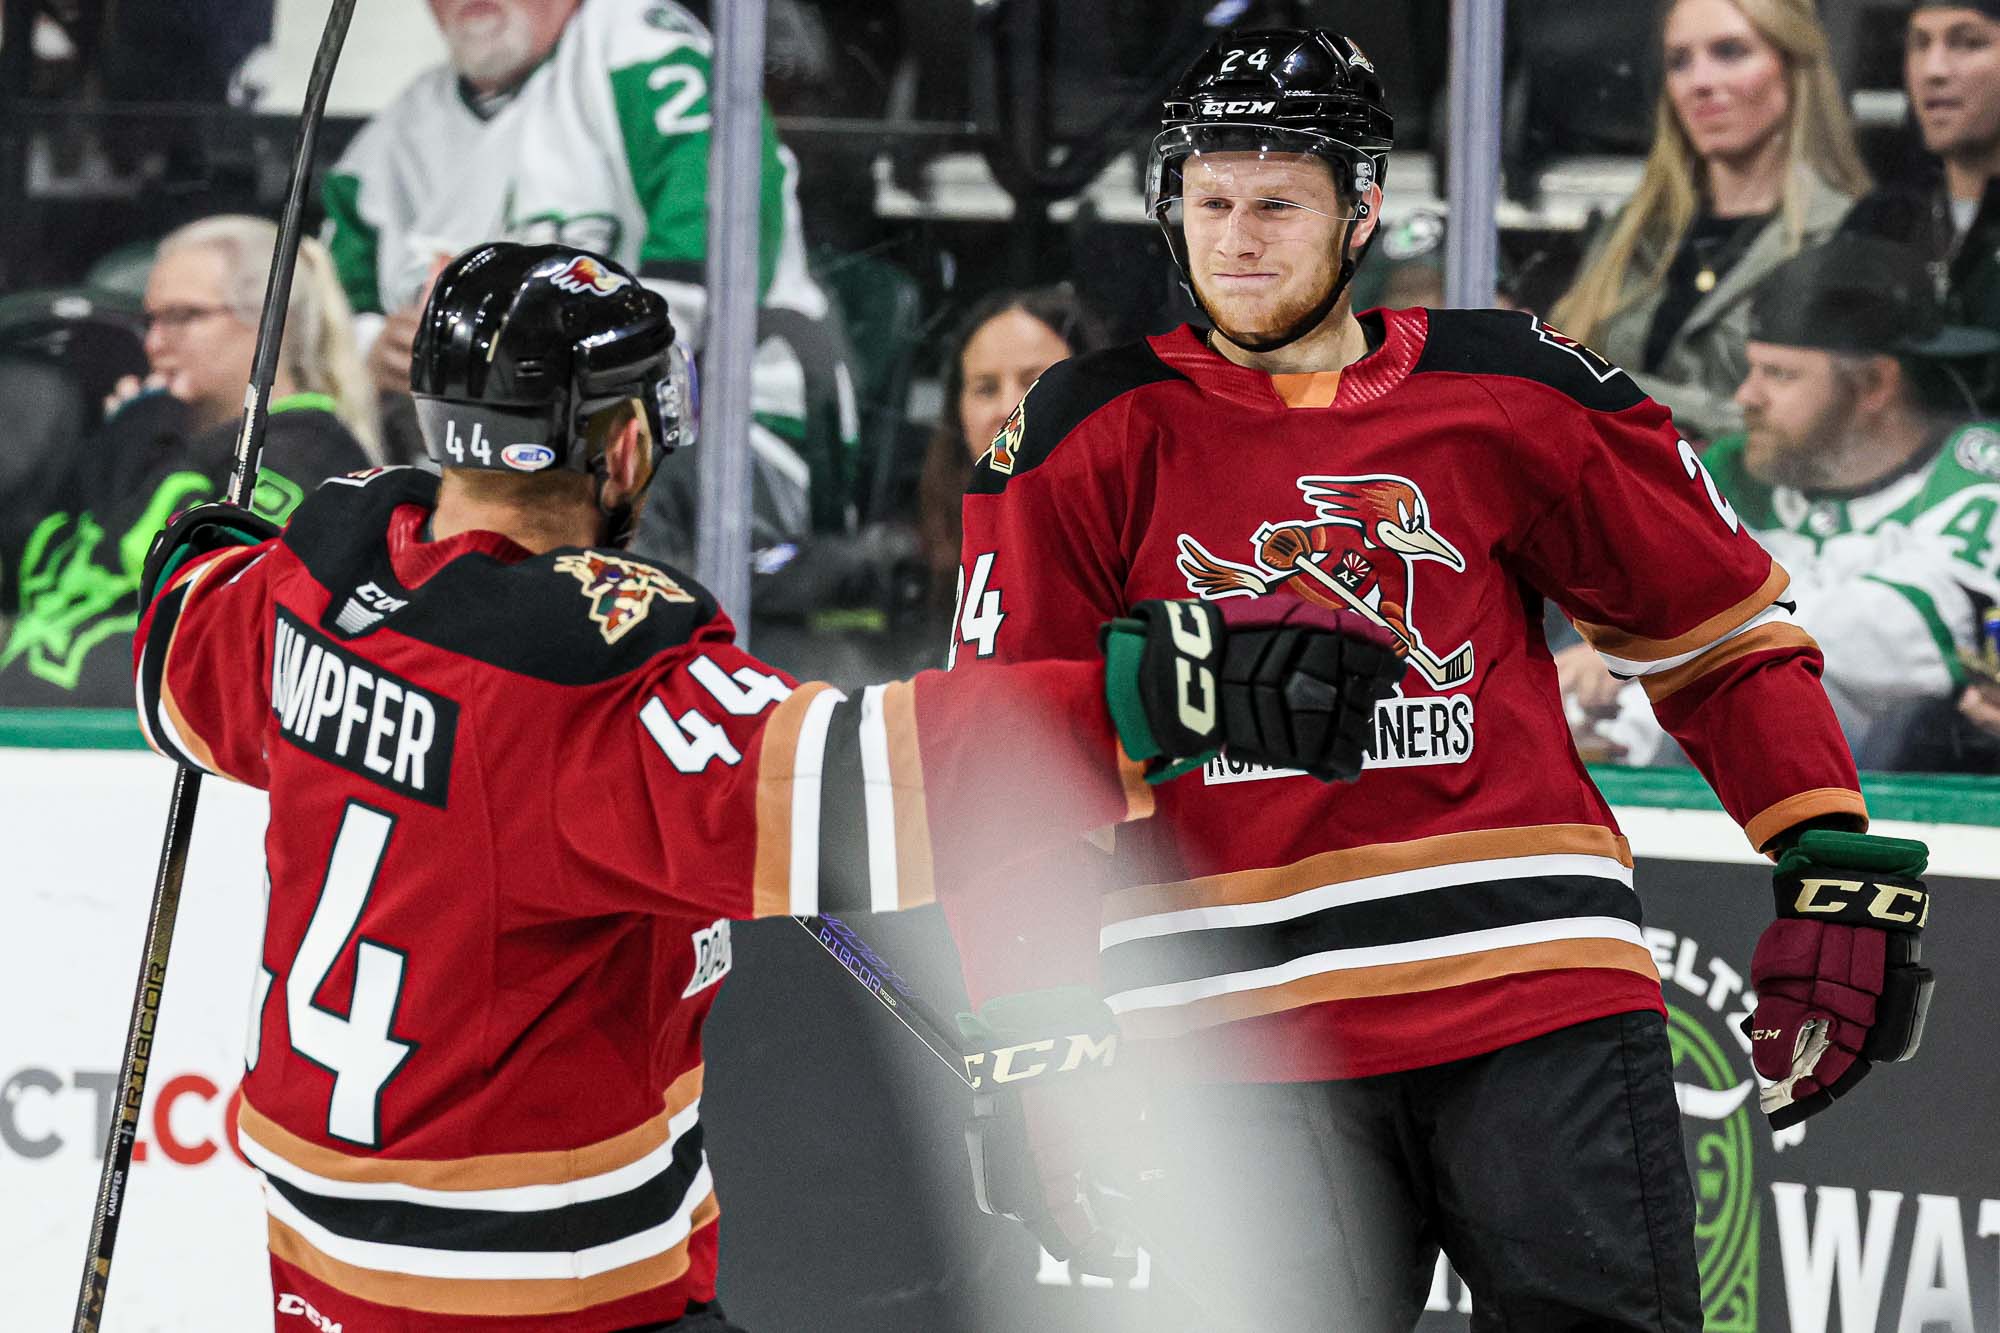 Monsters deliver thrilling 3-2 overtime win against Pens in